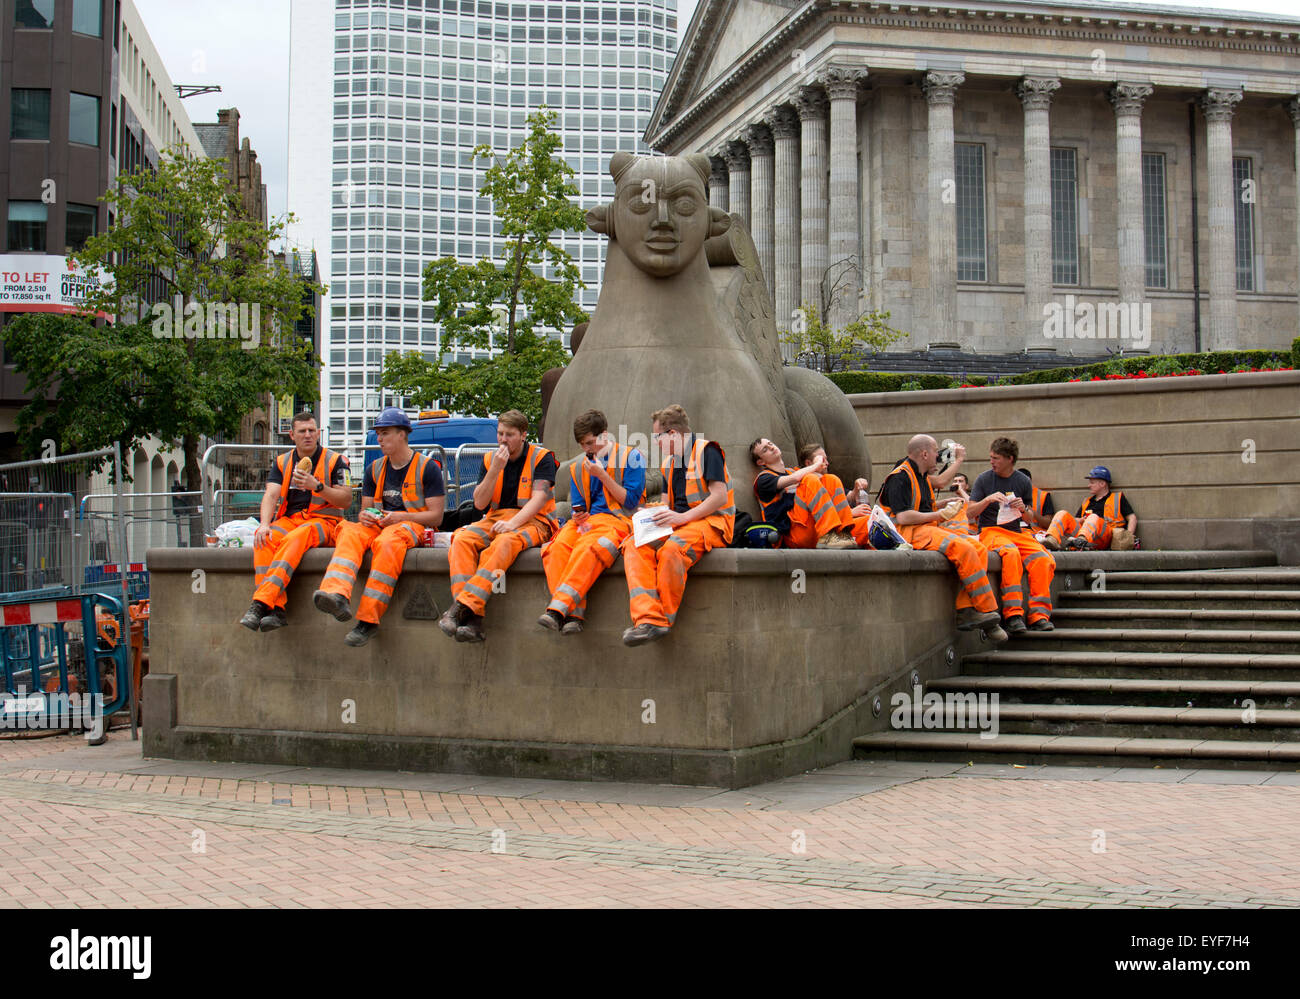 Construction workers having their lunch break in Victoria Square, Birmingham, UK Stock Photo